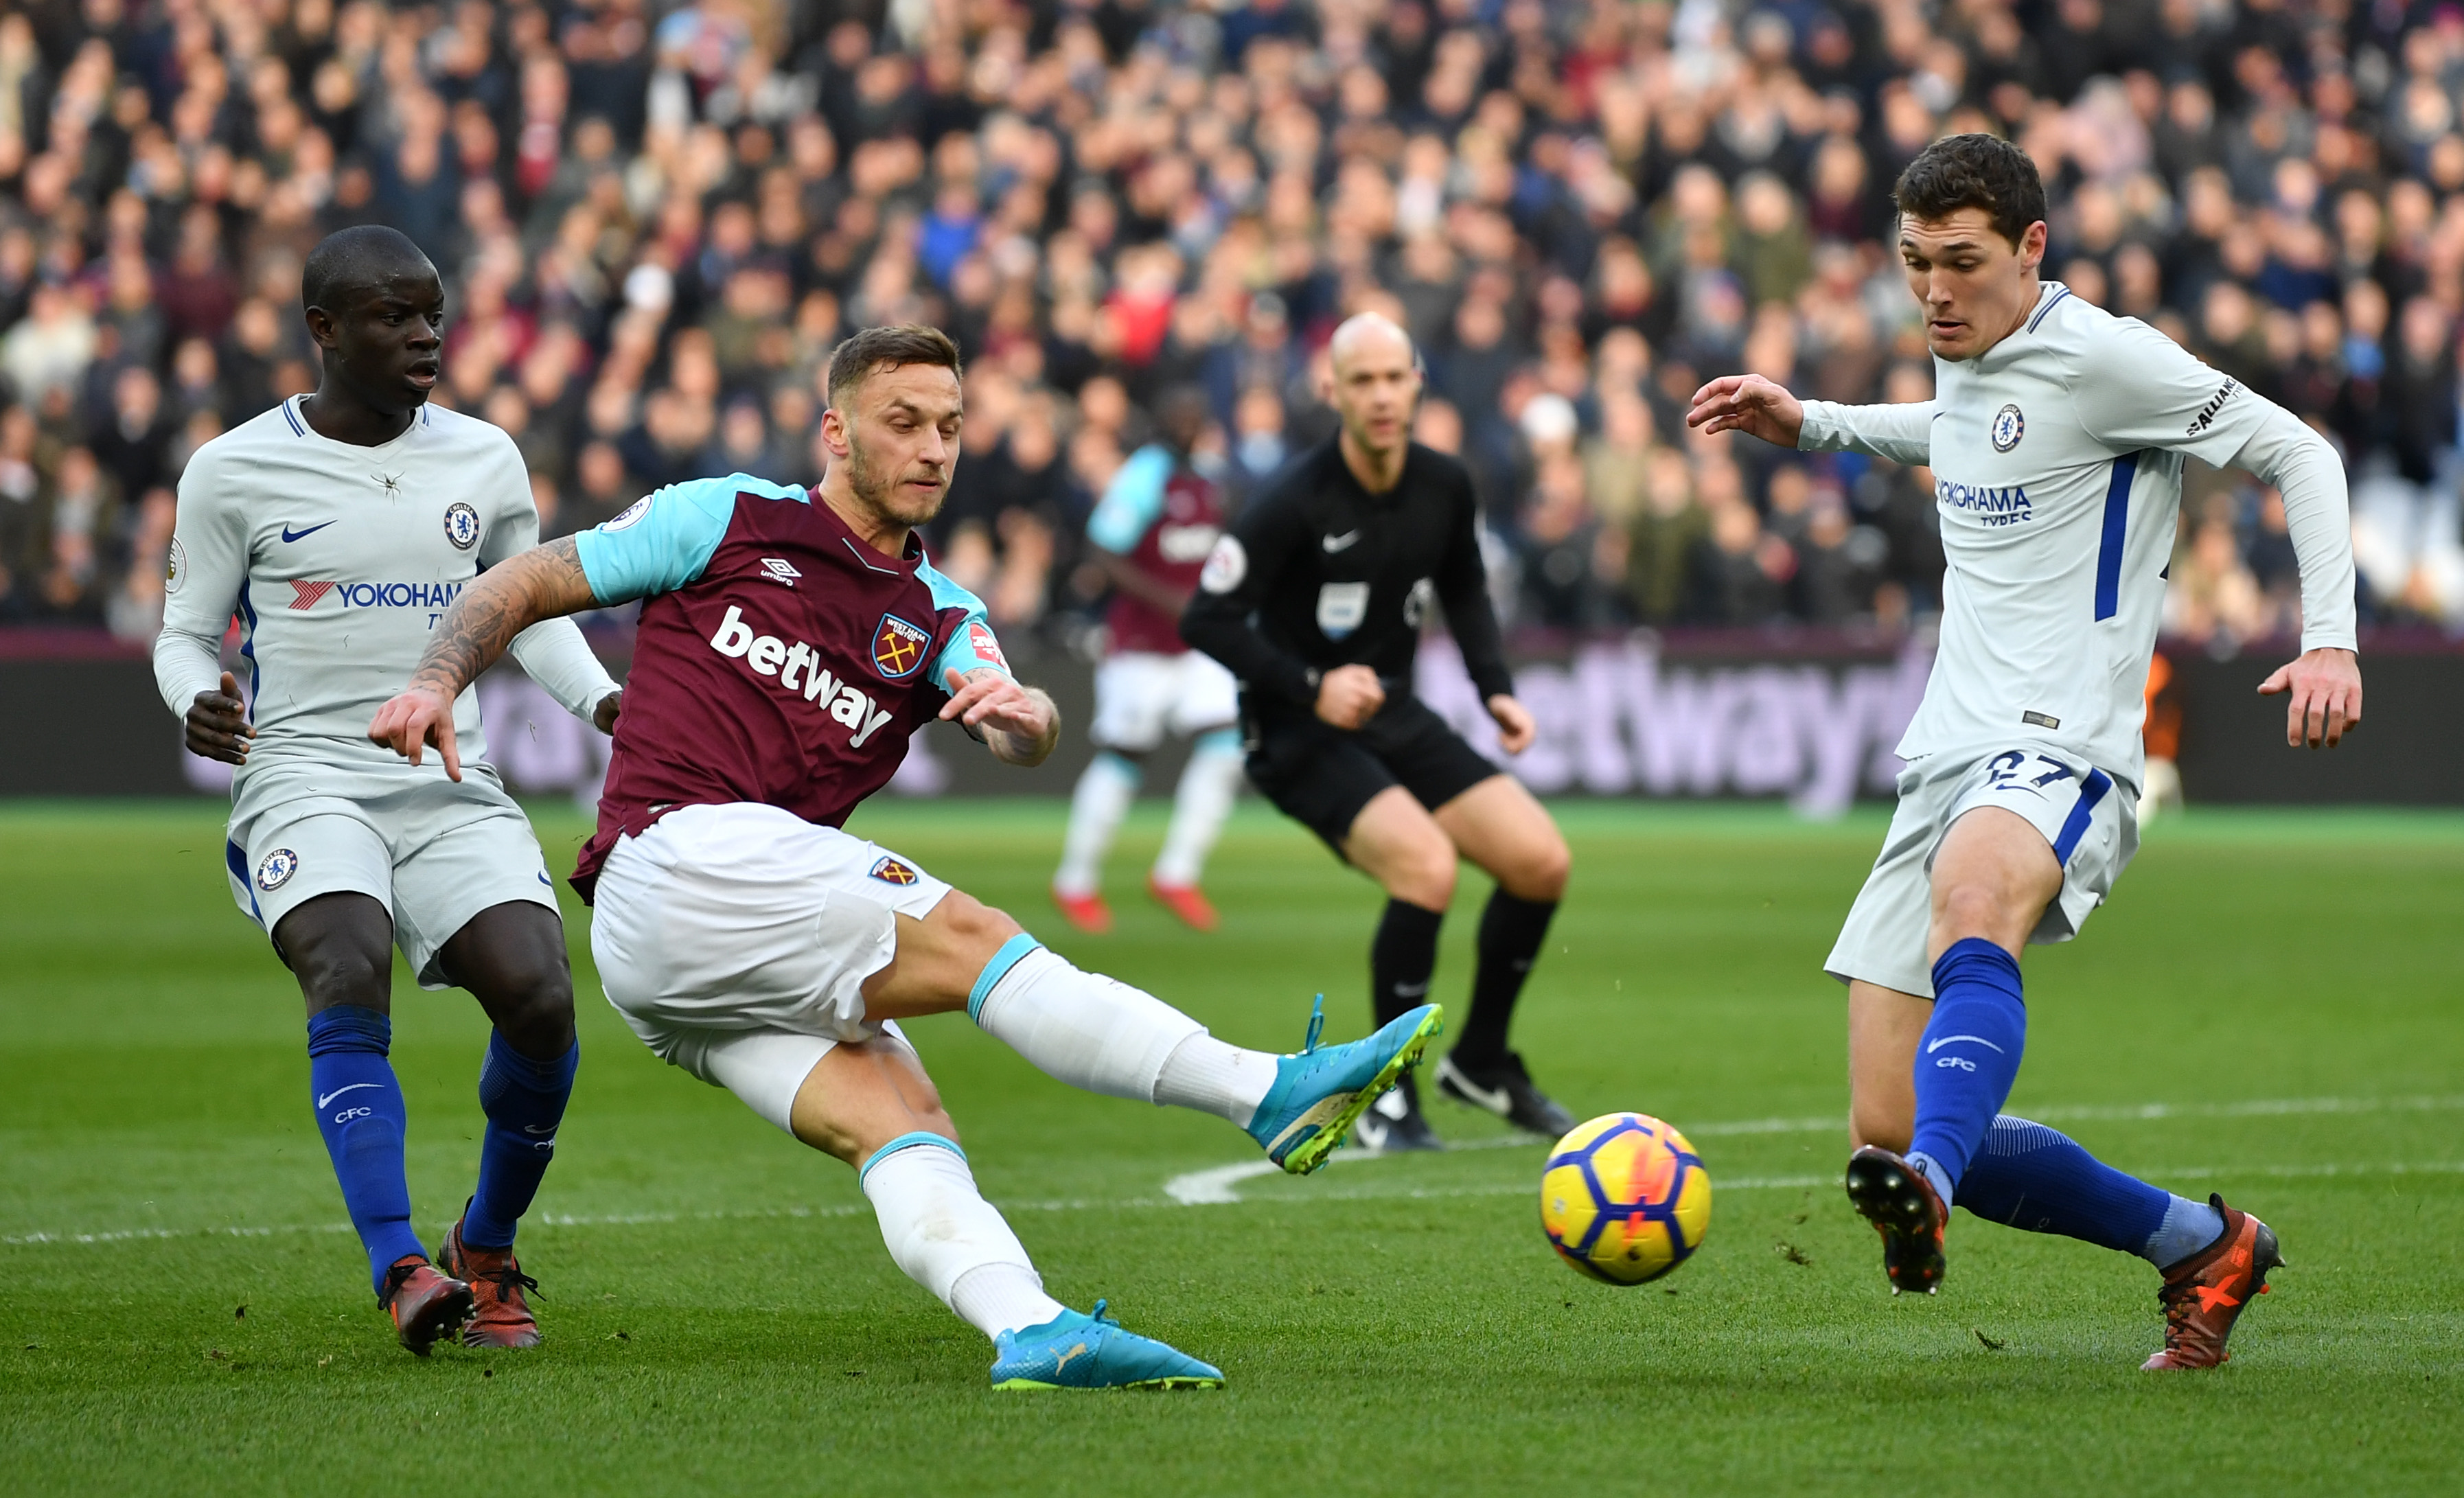 Premier League Round Up | West Ham United beat Chelsea; Crystal Palace plays draw with Bournemouth